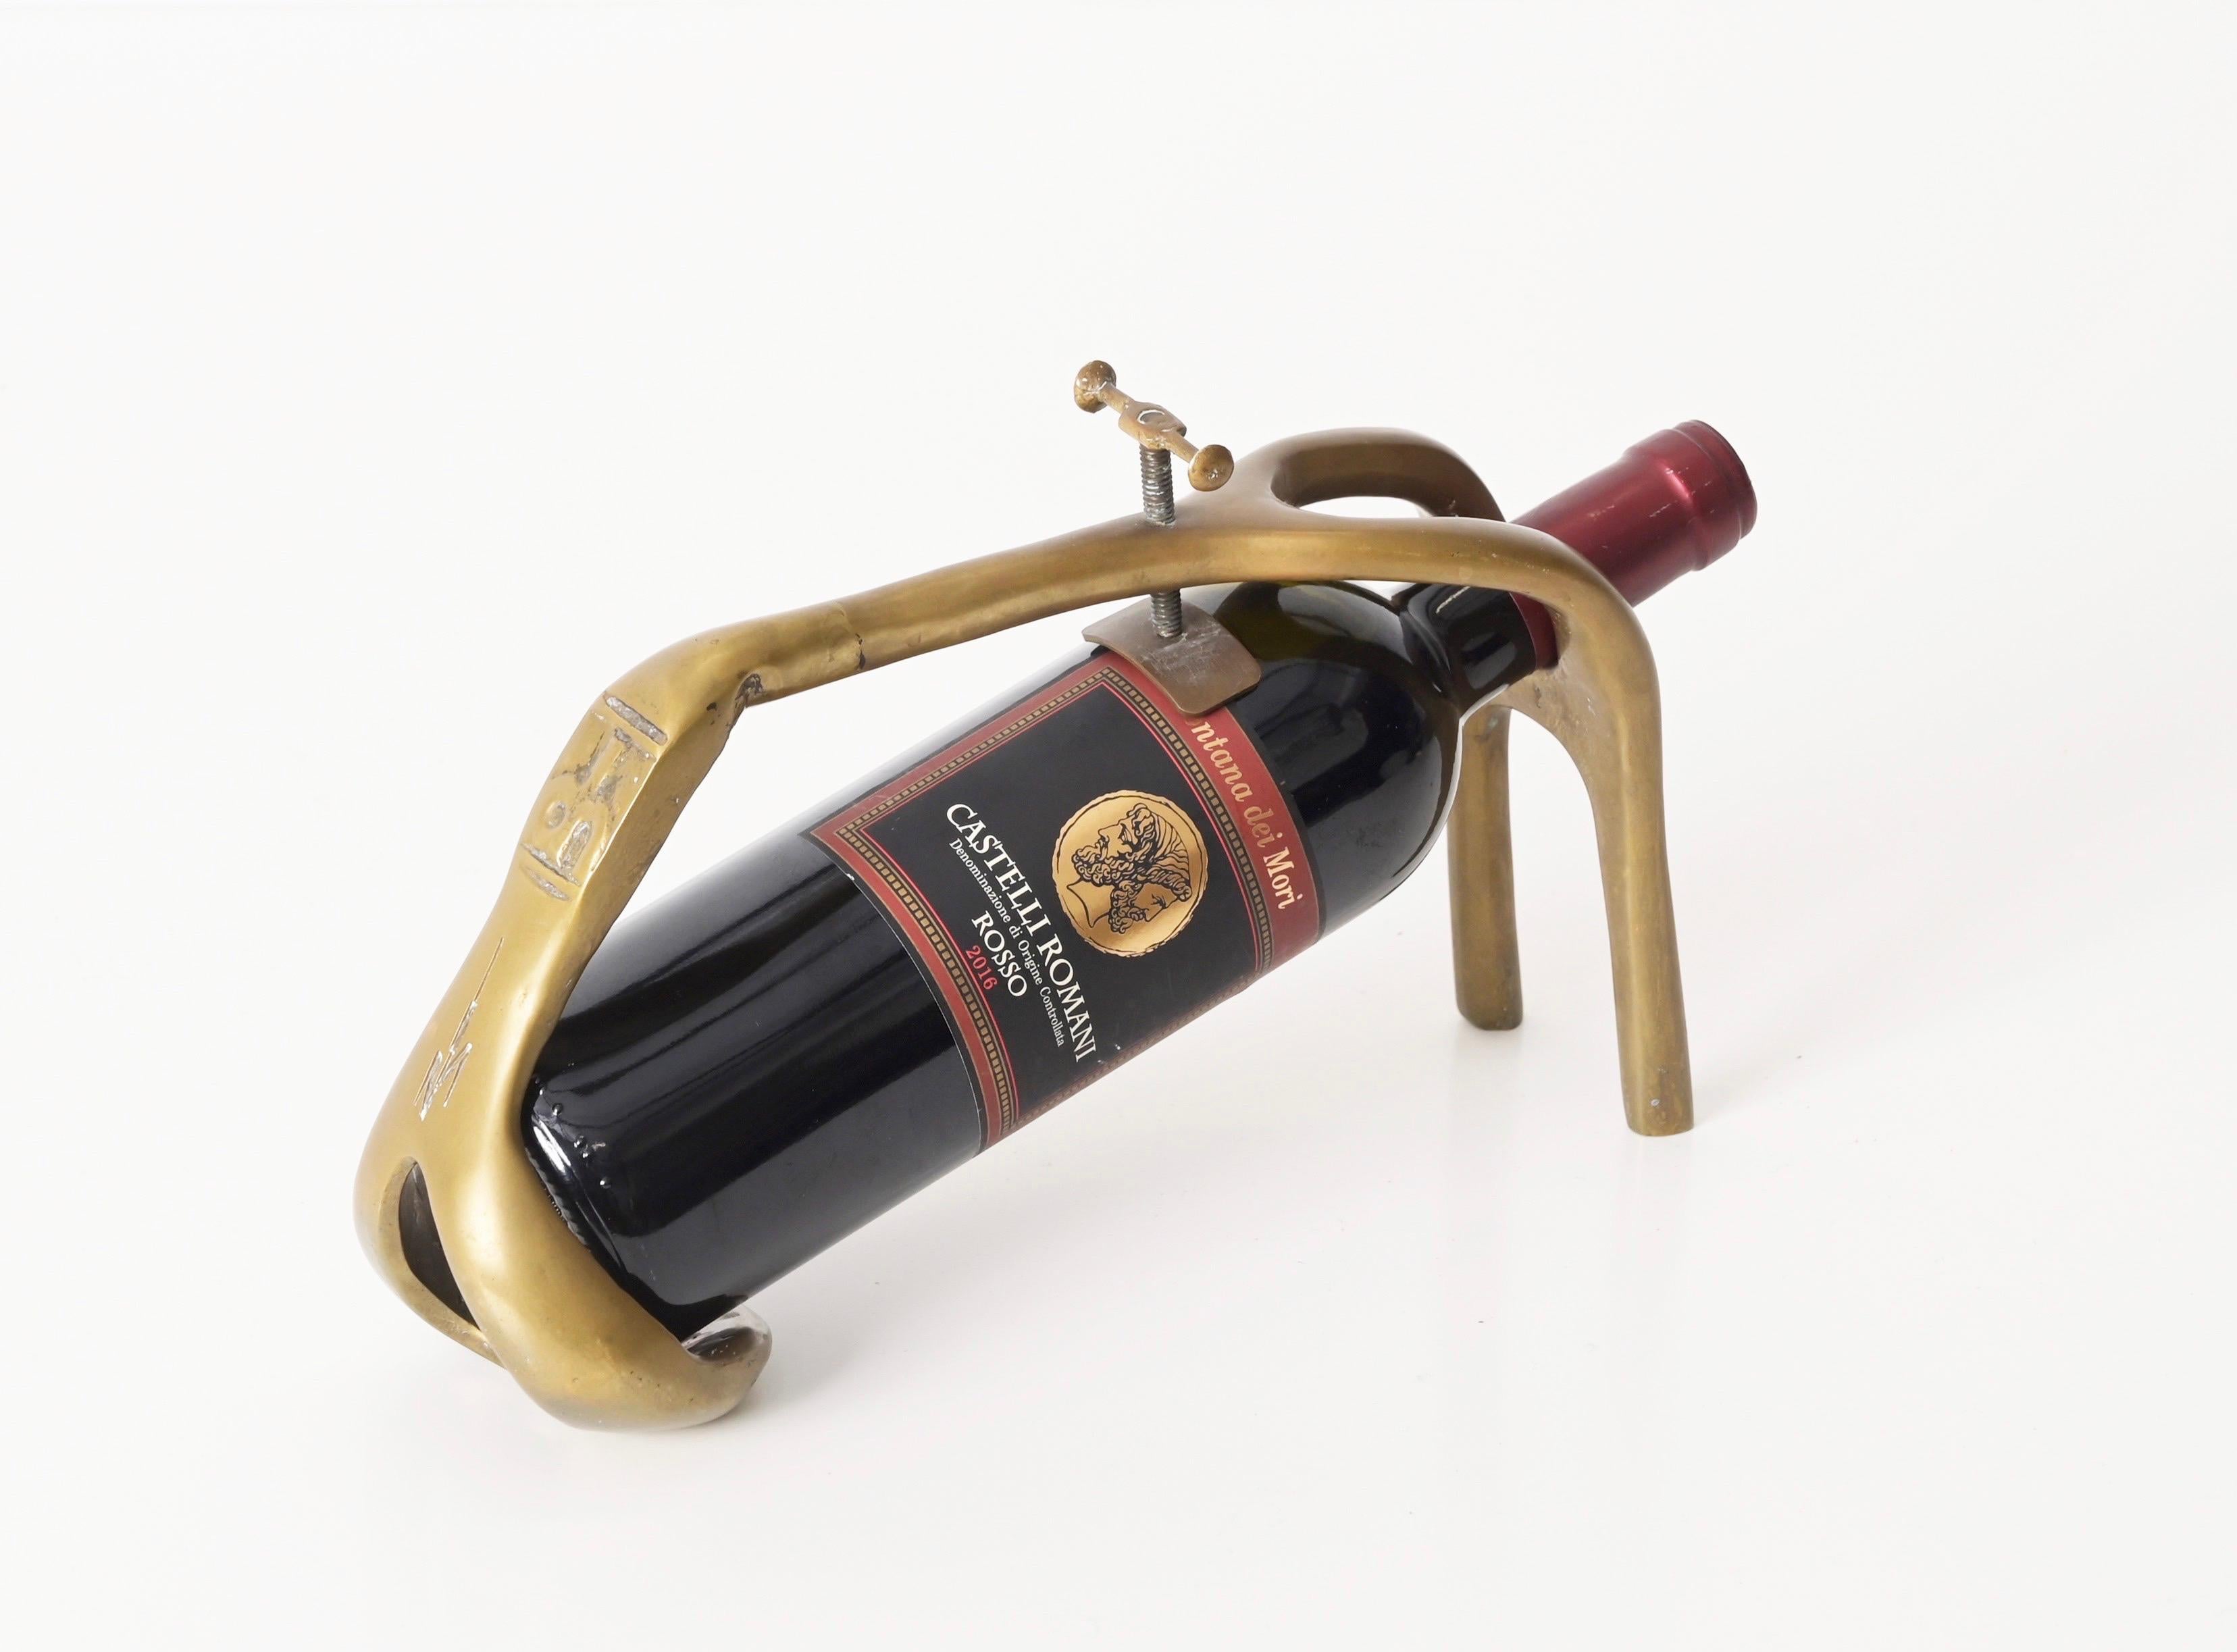 Wonderful wine holder in solid brass. This rare piece was designed by David Marshall and is signed on the handle. It was produced in Spain during the early 1970s. 

This charming wine holder is fully made in brass, with an eye-catching design it